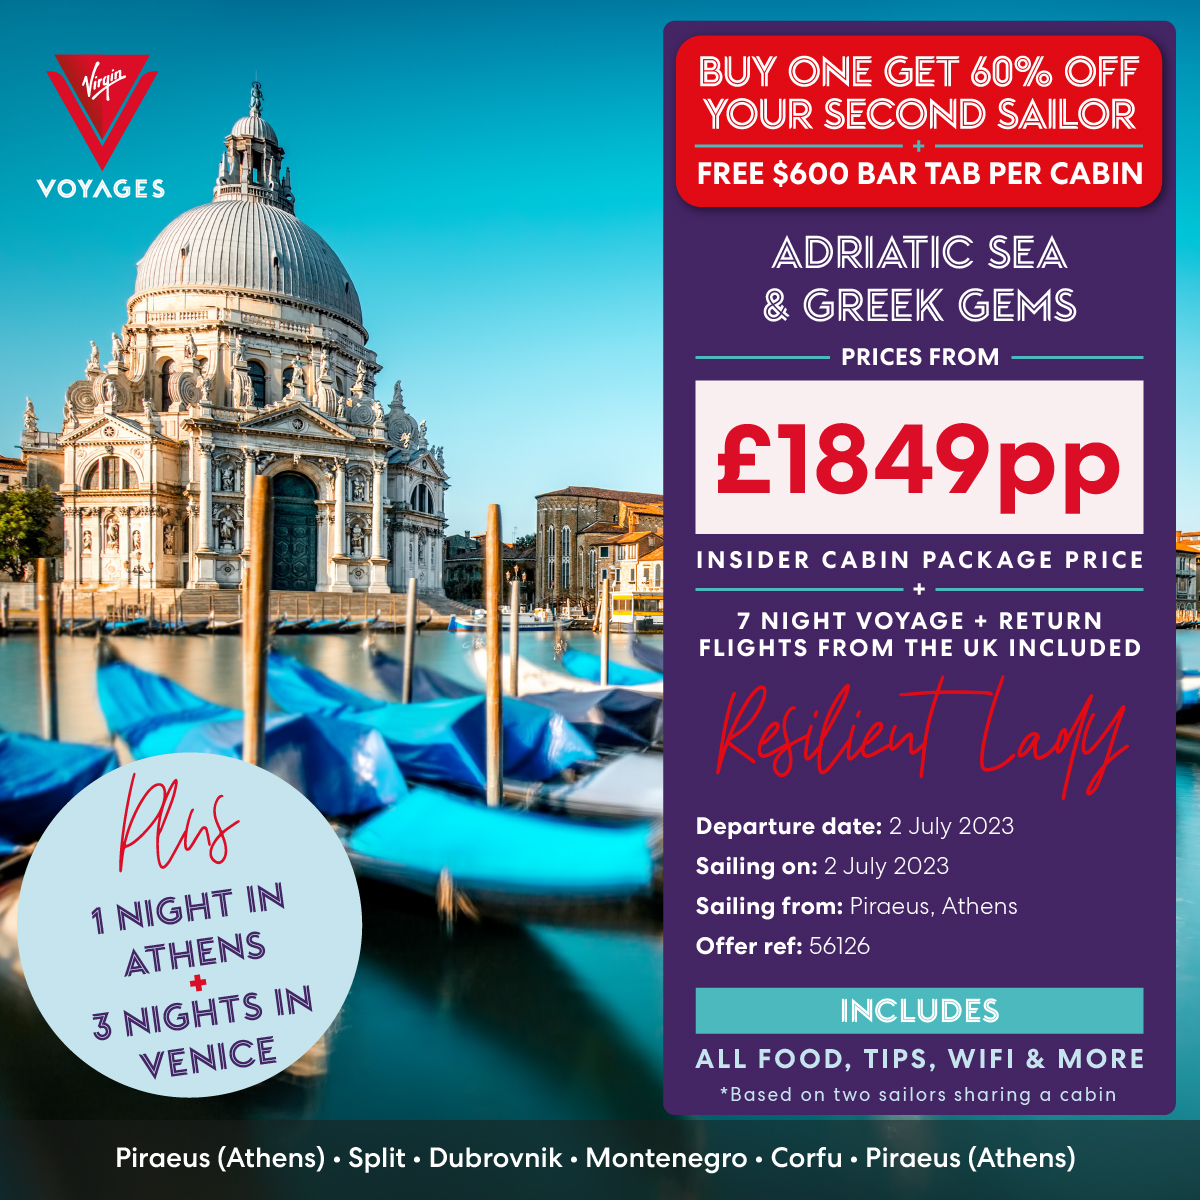 Set sail the Virgin Voyages way onboard the beautiful Resilient Lady and experience the best of the Adriatic sea. Enjoy gorgeous historical cities, ancient cultures and vibrant communities.